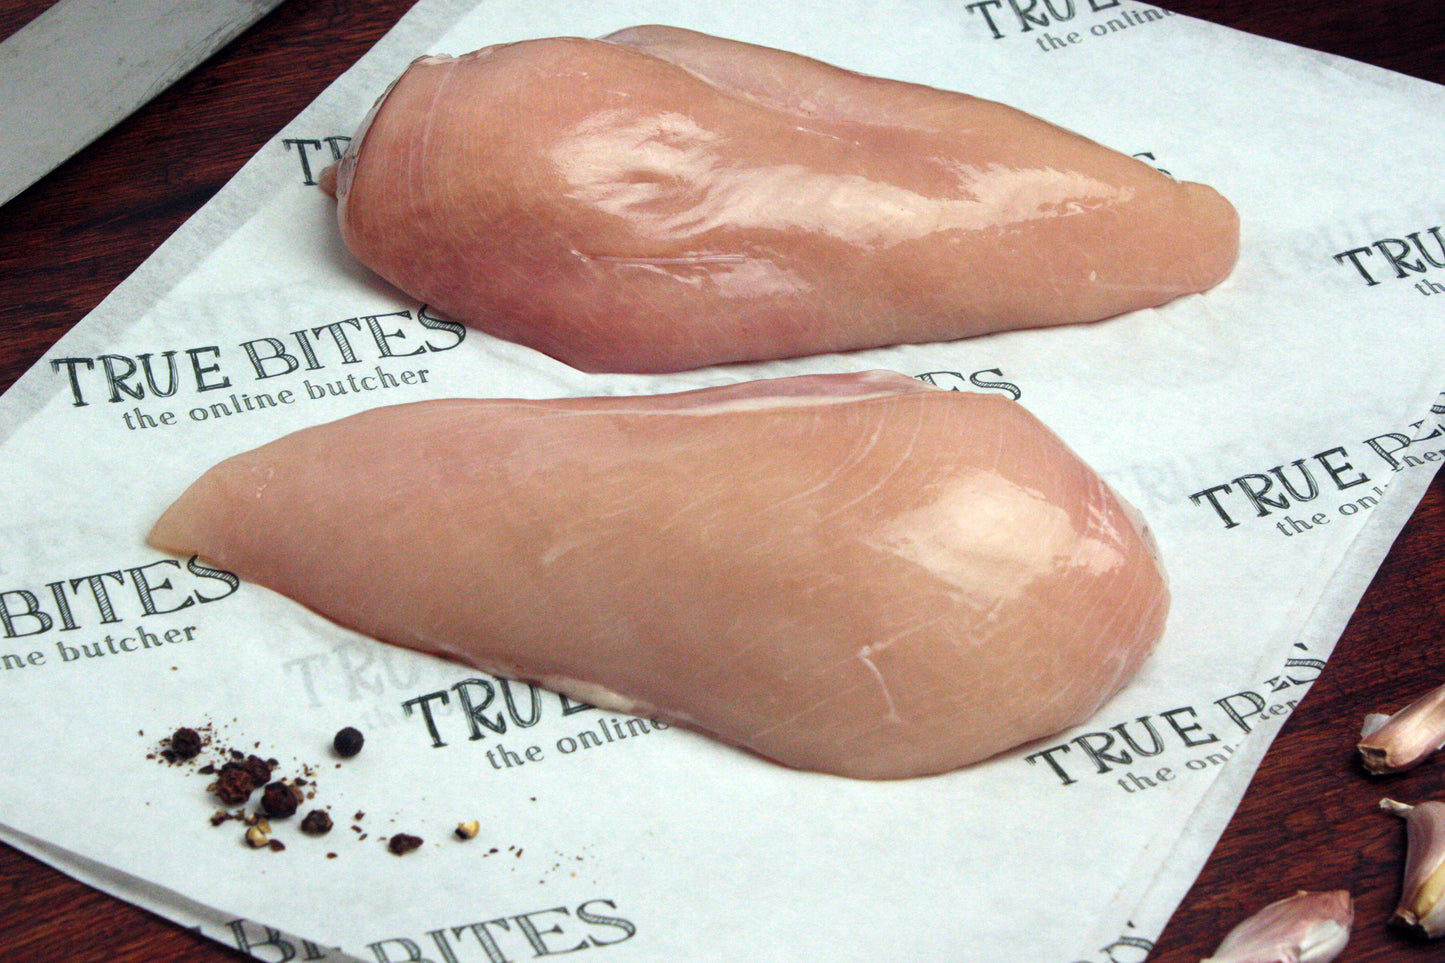 2 raw chicken fillets on true bites branded greaseproof paper